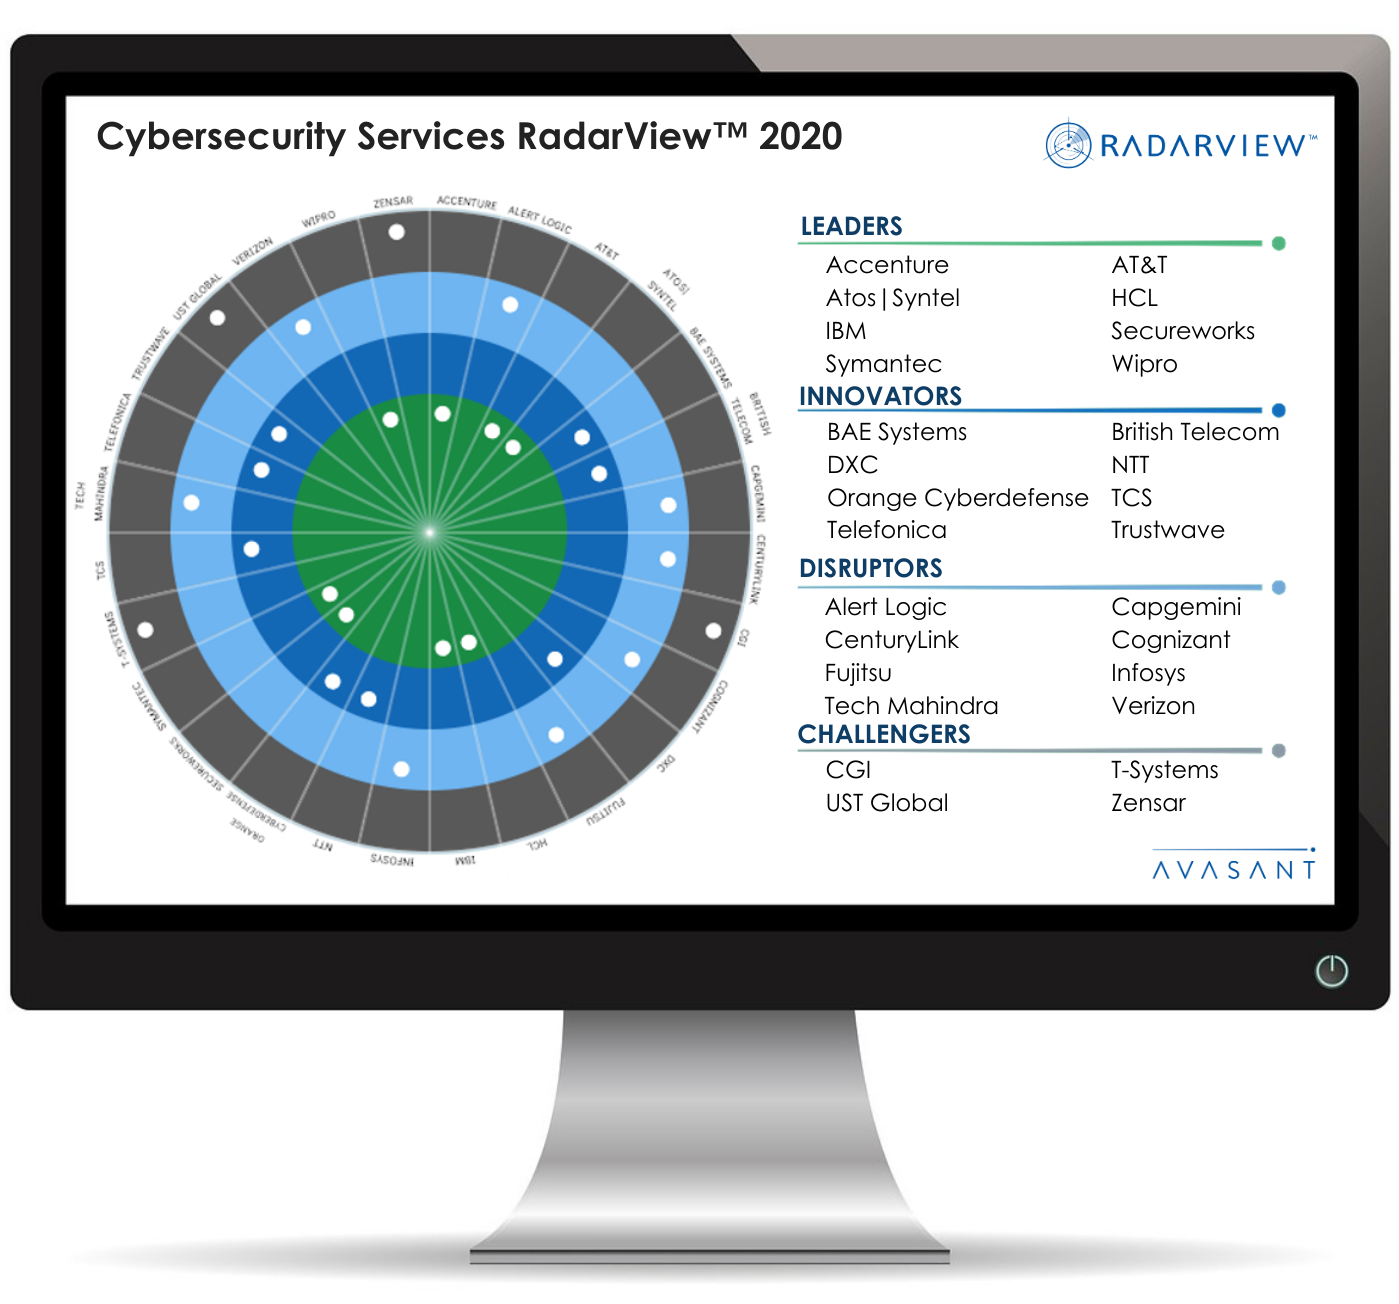 Cybersecurity RV 1 1 - Cybersecurity Services RadarView™ 2020 - Trustwave